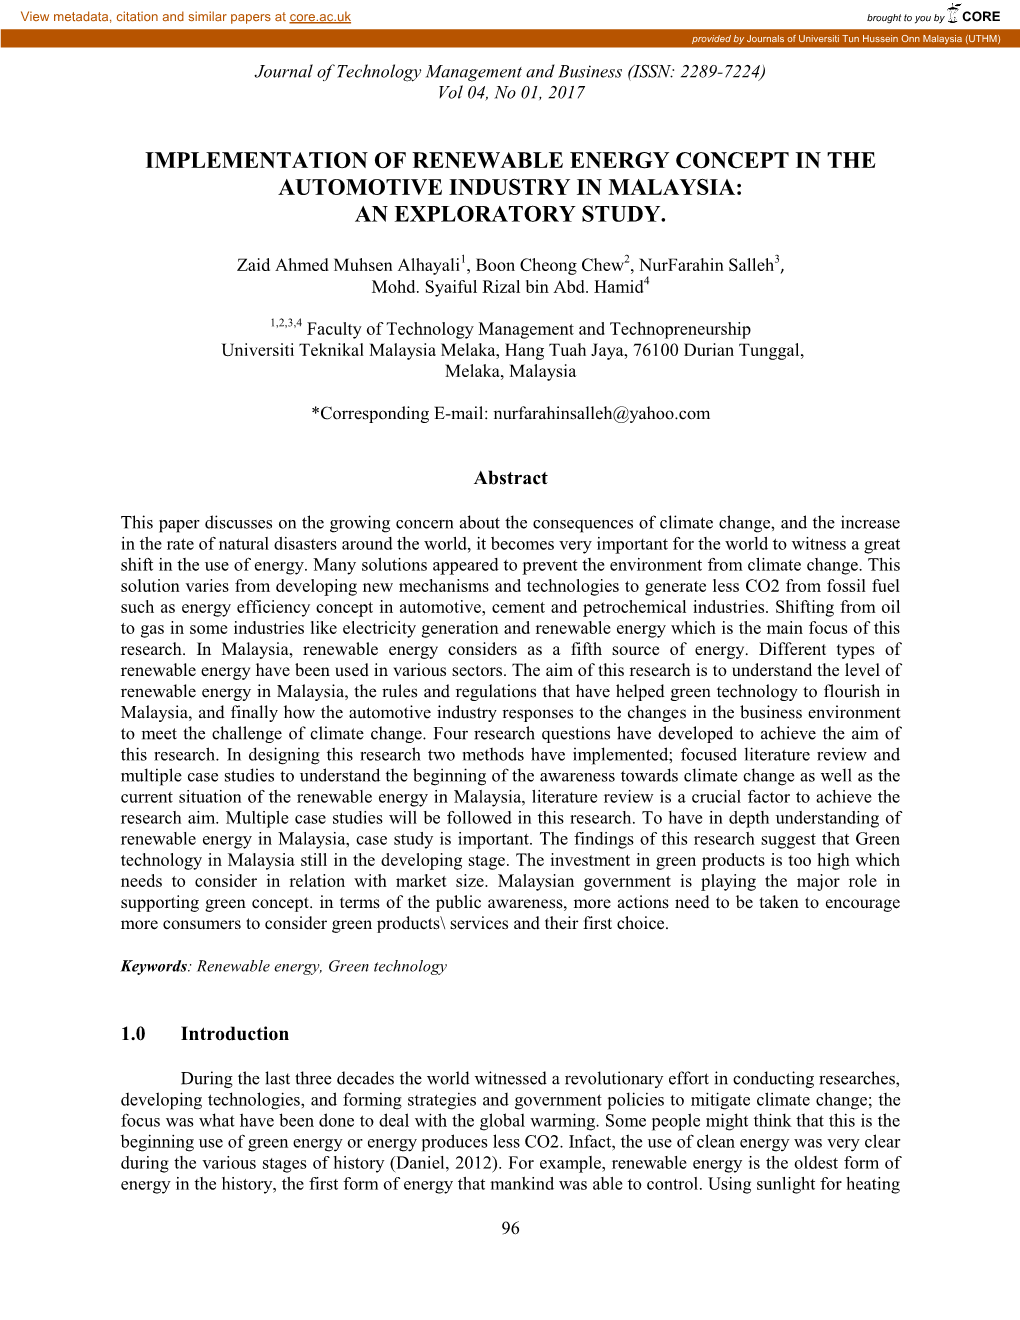 Implementation of Renewable Energy Concept in the Automotive Industry in Malaysia: an Exploratory Study